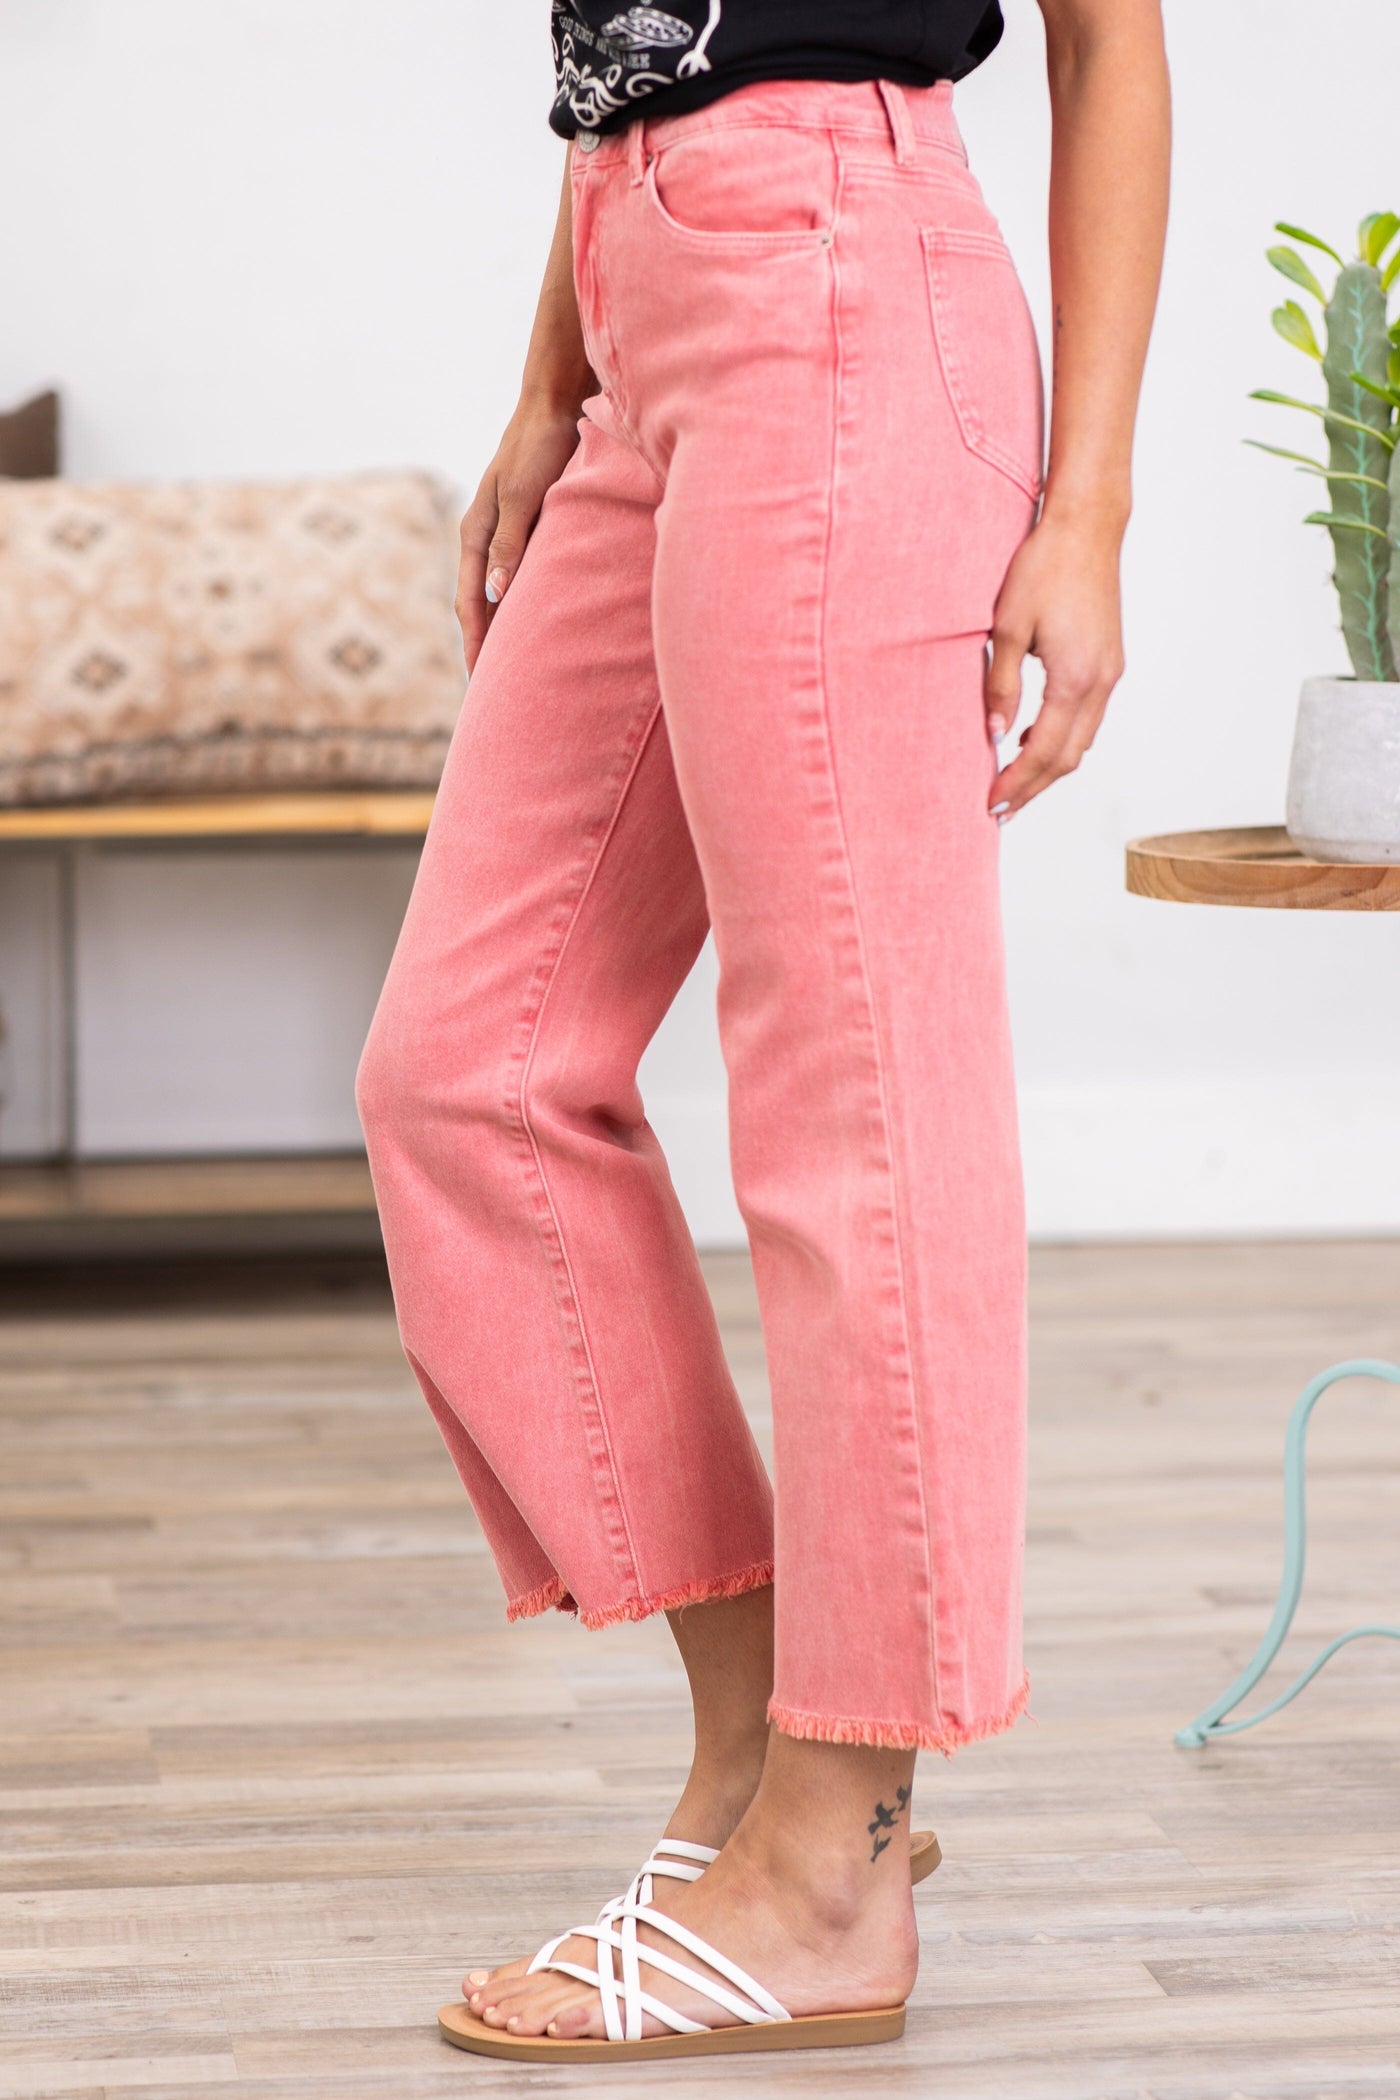 ***DOORBUSTER*** It's About Time 2 Colored Denim Wide Leg Jeans in Blackberry Ash Pink